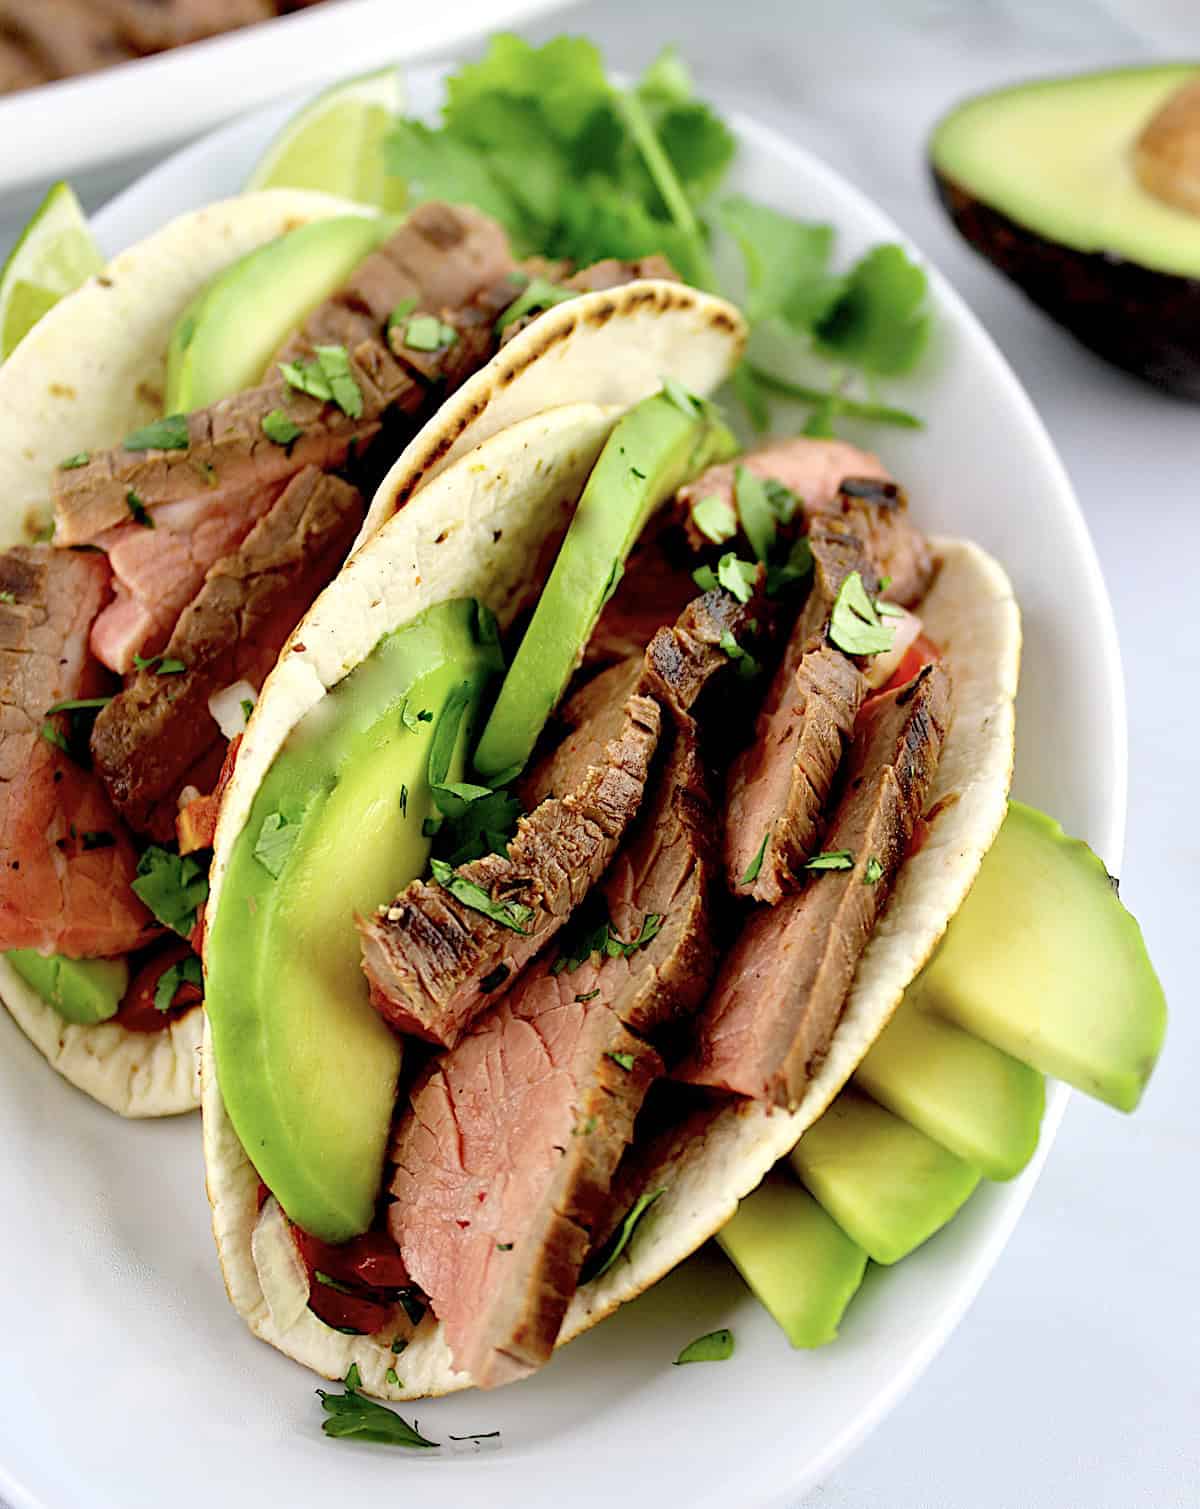 Carne Asada in 2 tacoes with avocado slices